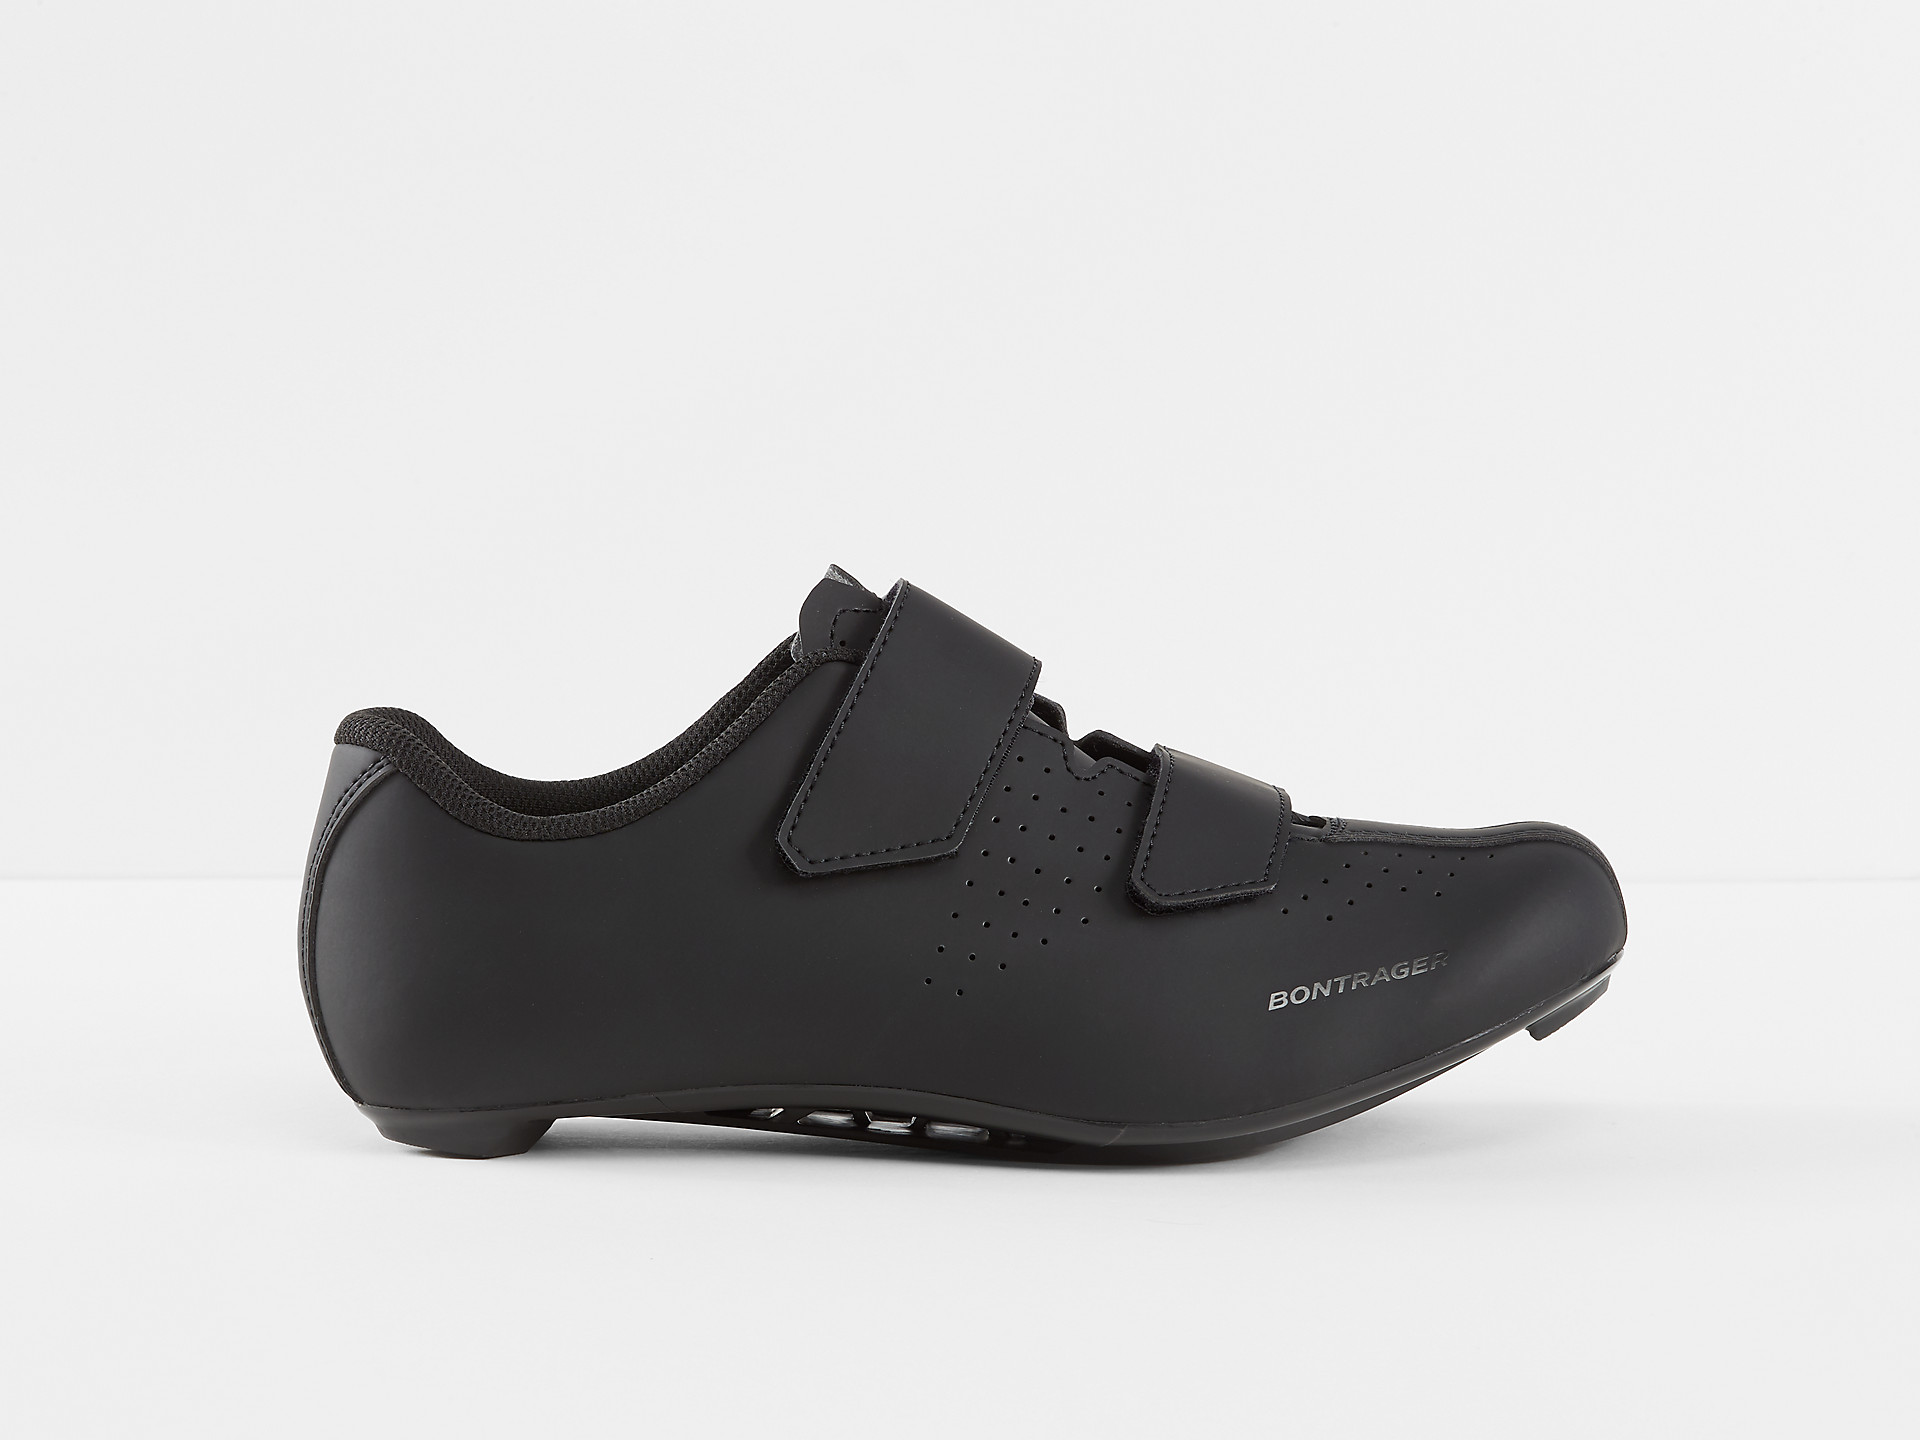 <a href="https://cycles-clement.be/product/bont-chaussures-solstice-41-bla/">BONT CHAUSSURES SOLSTICE 41 BLA</a>